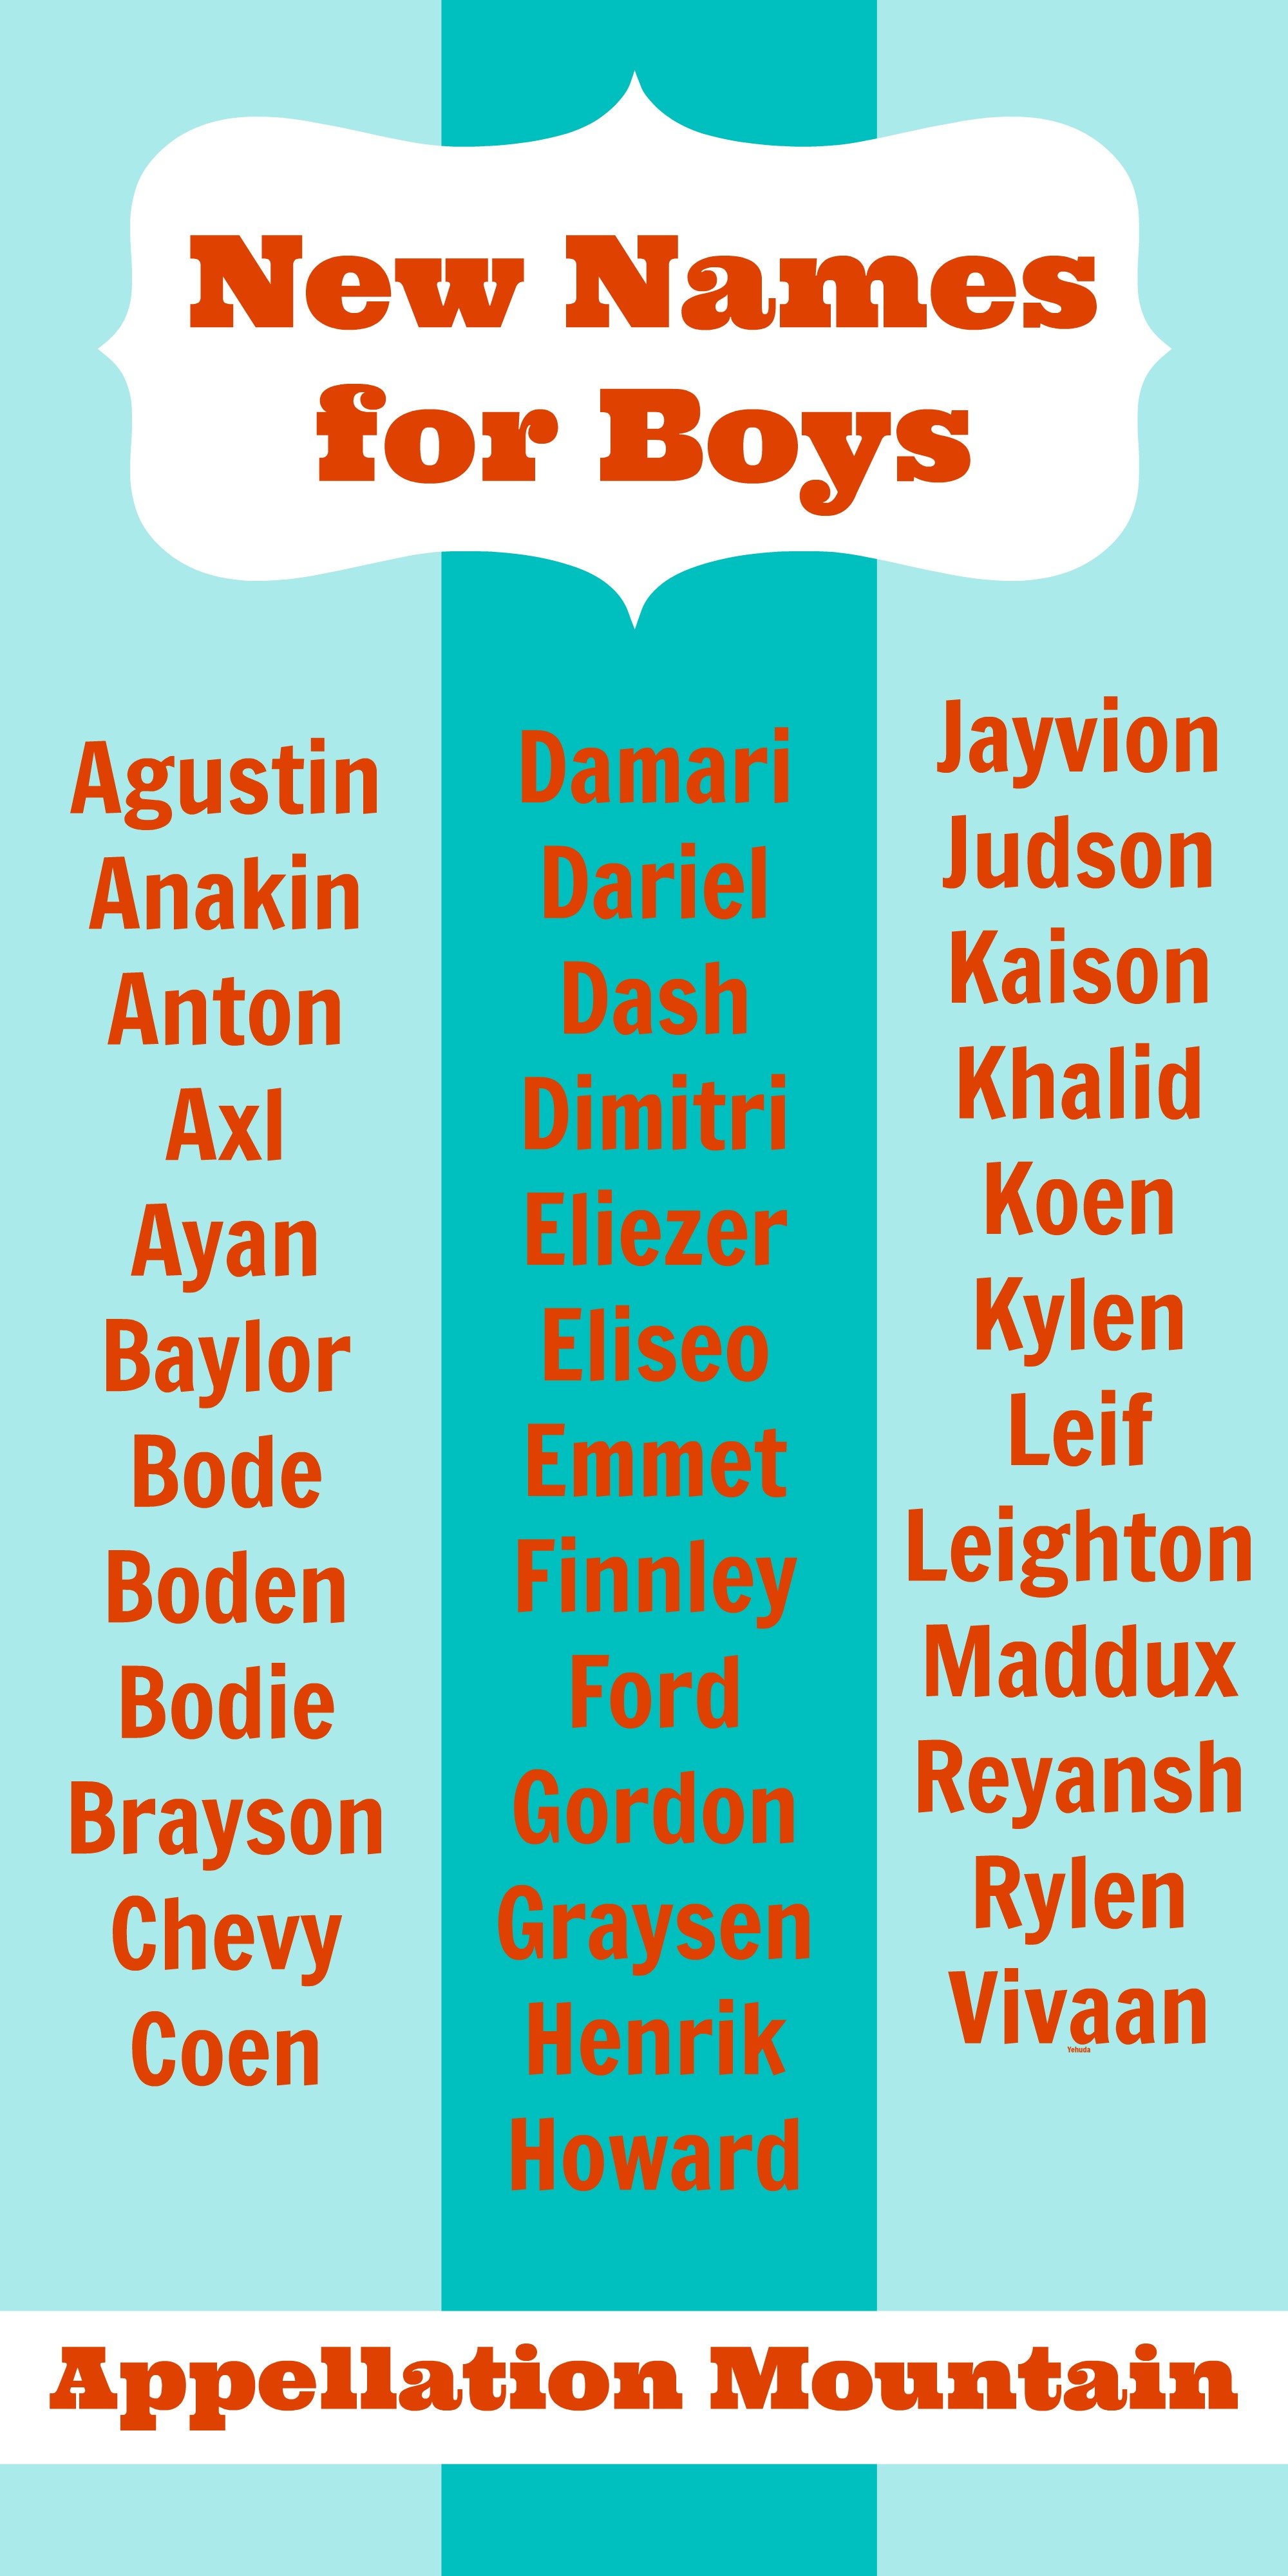 New Names for Boys 2014.